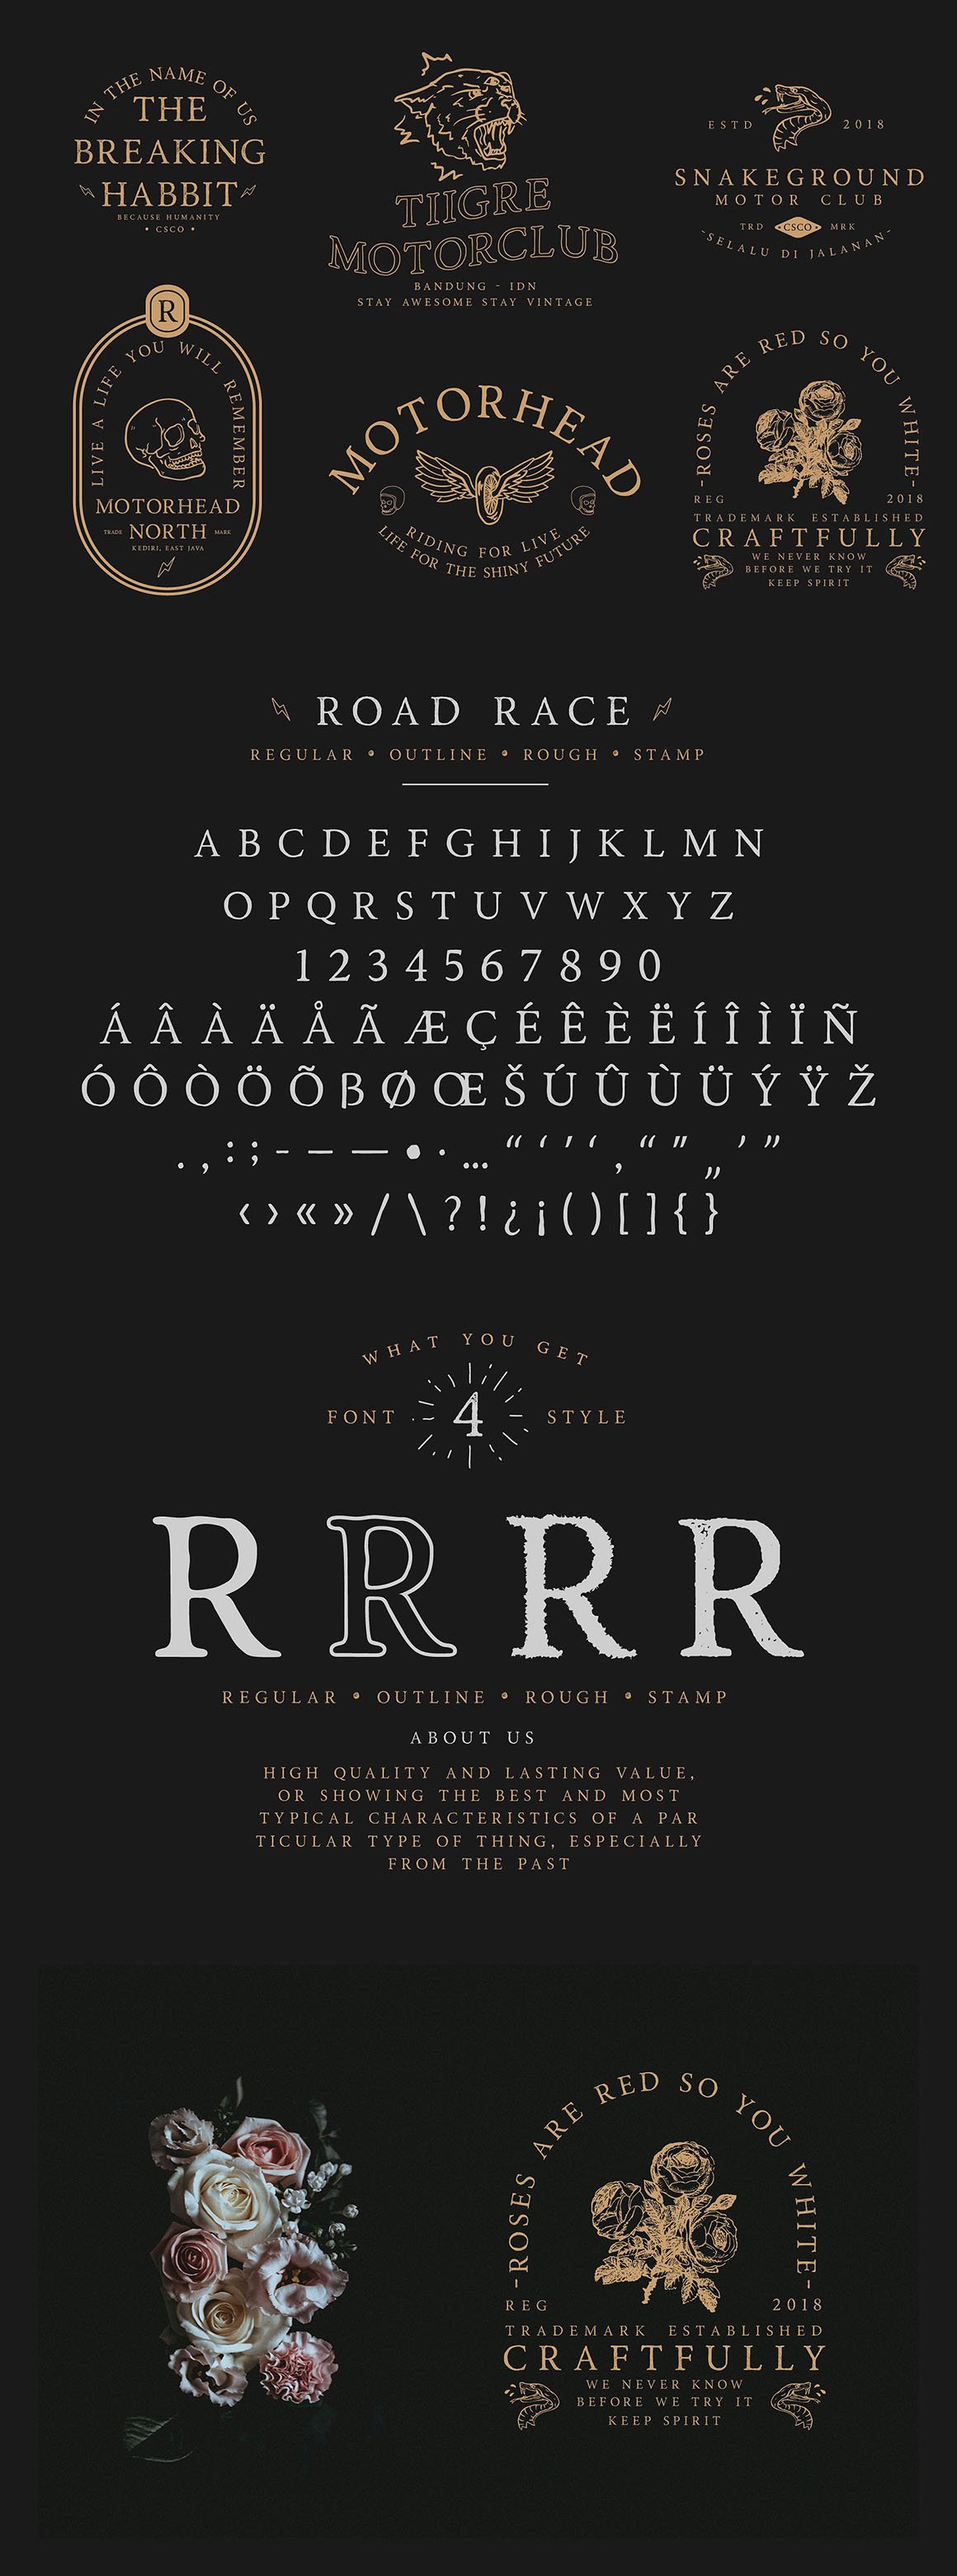 Road Race Font Family and Extras